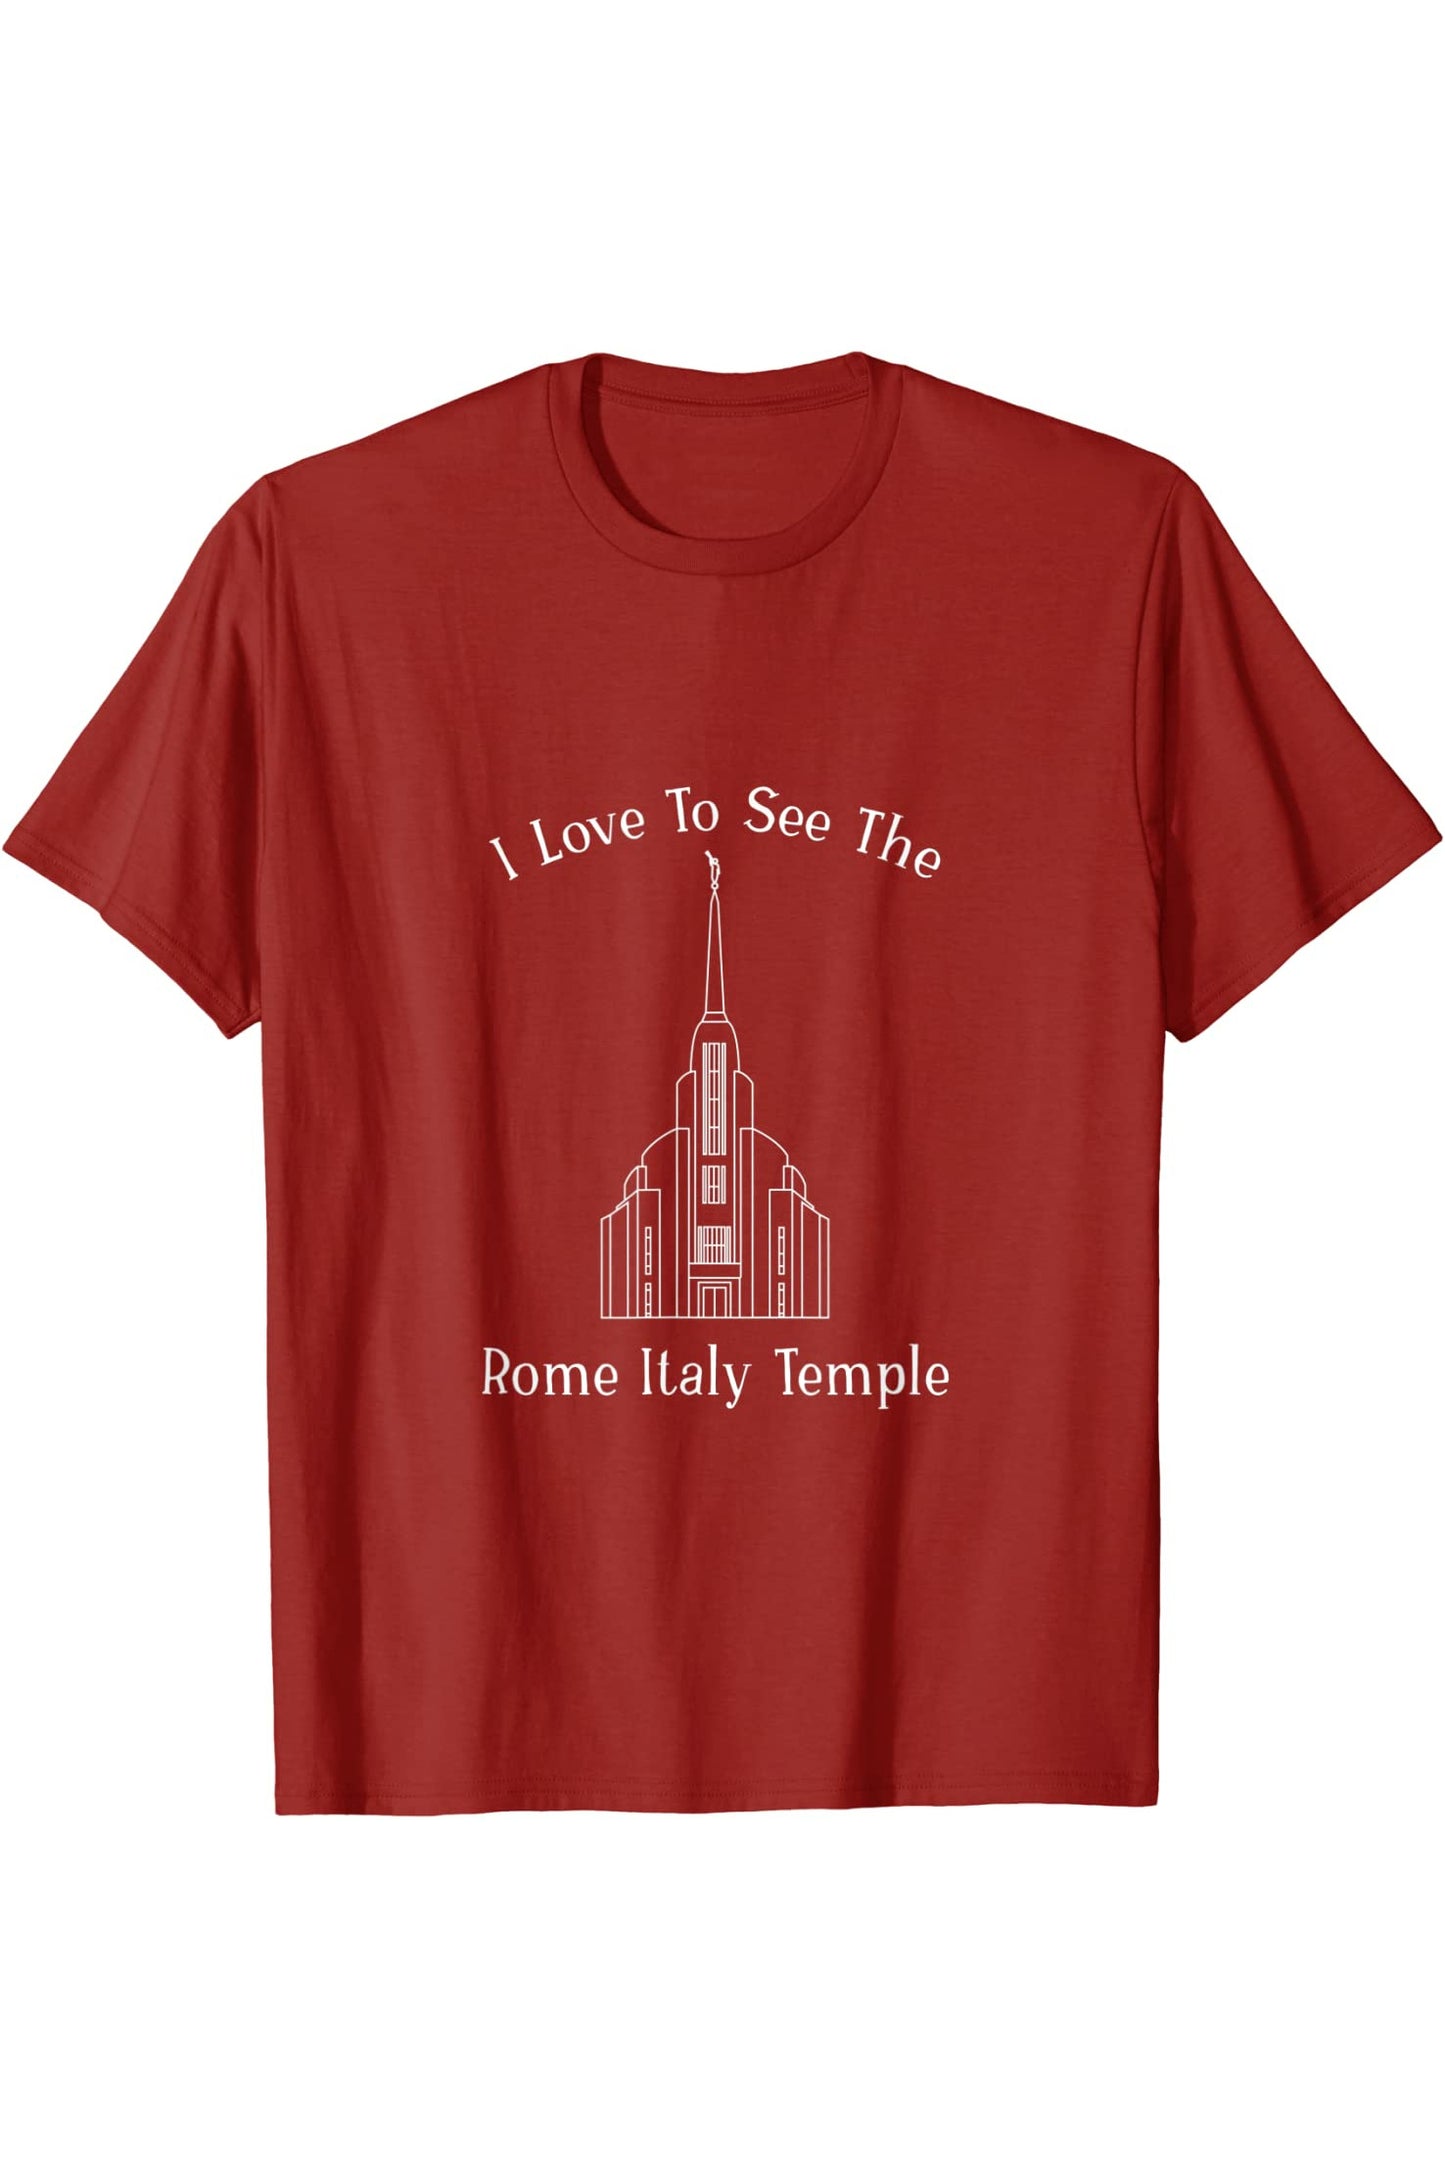 Rom Italy Temple, I love to see my Temple, happy T-Shirt